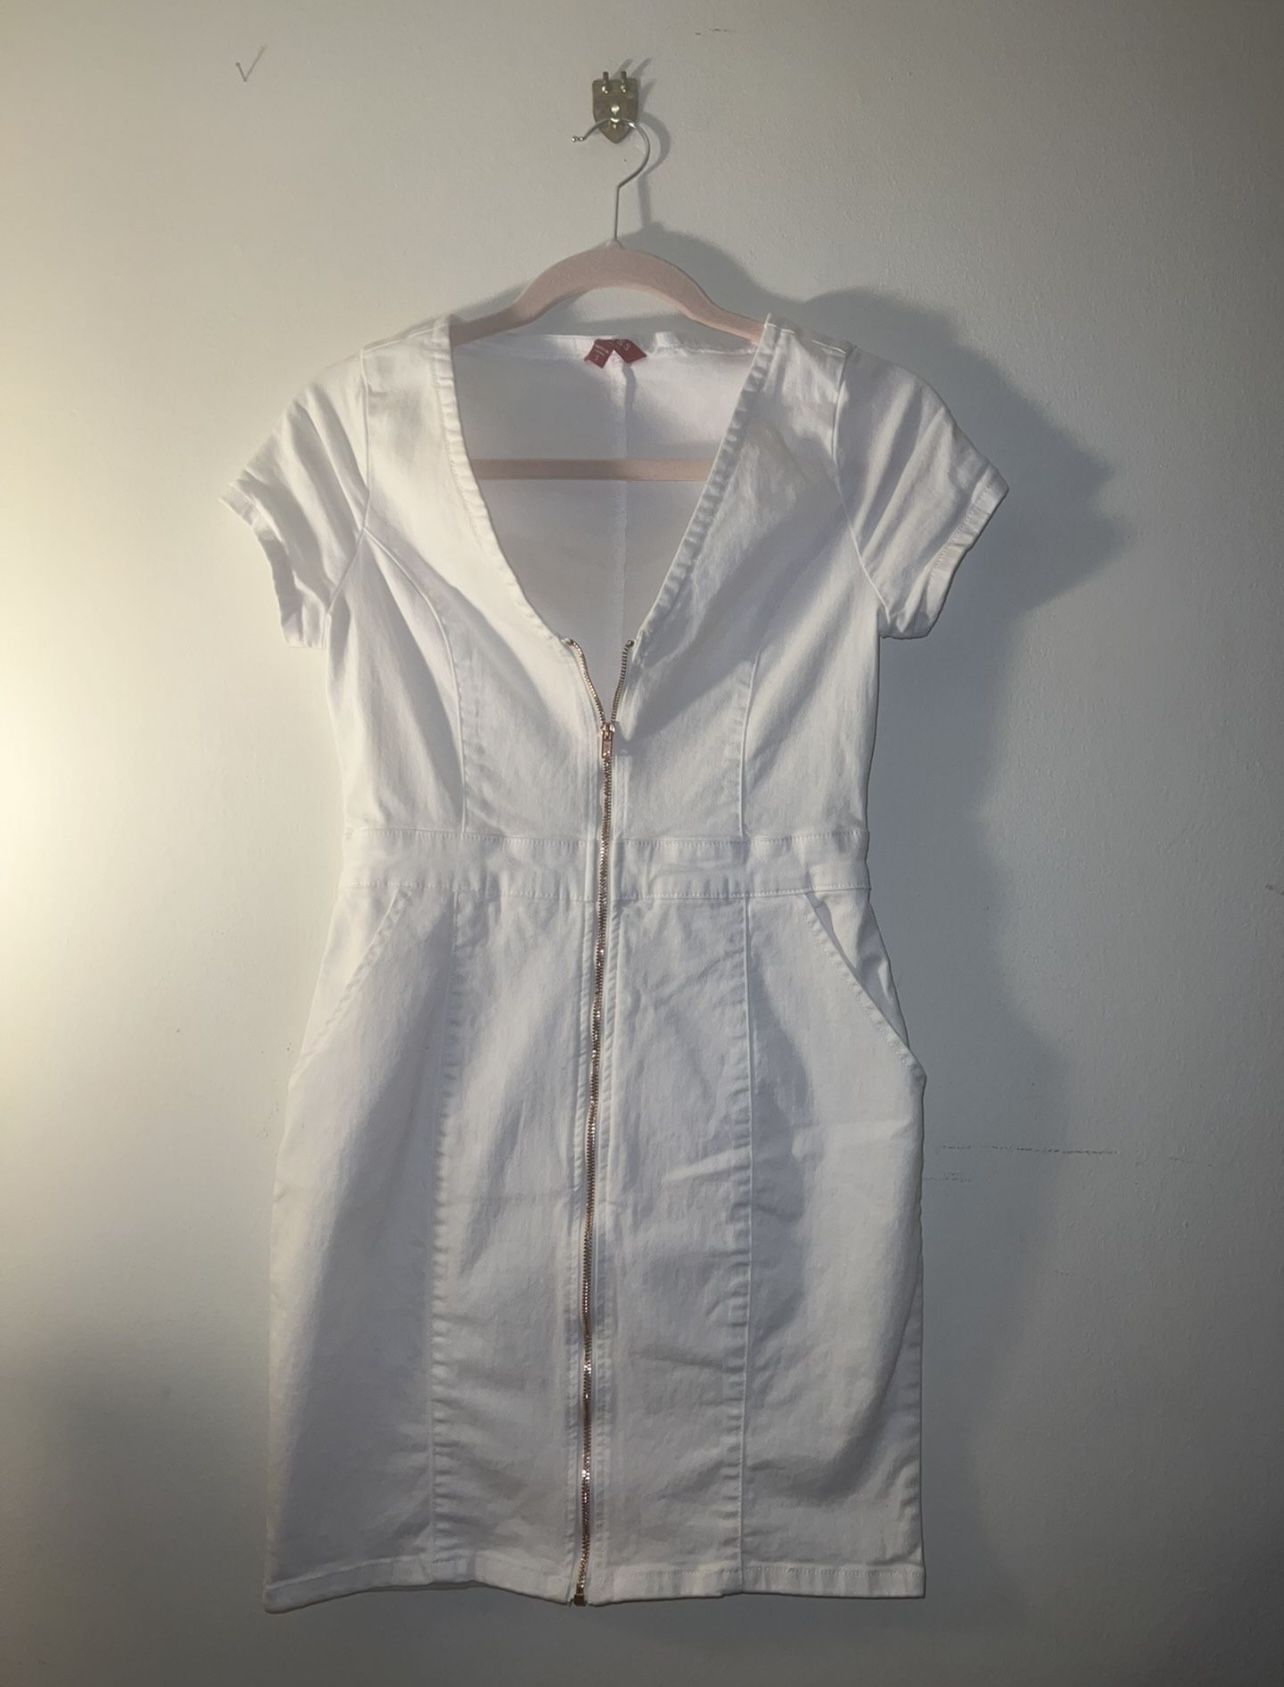 New Guess White Denim & Rose Gold Dress Size Small